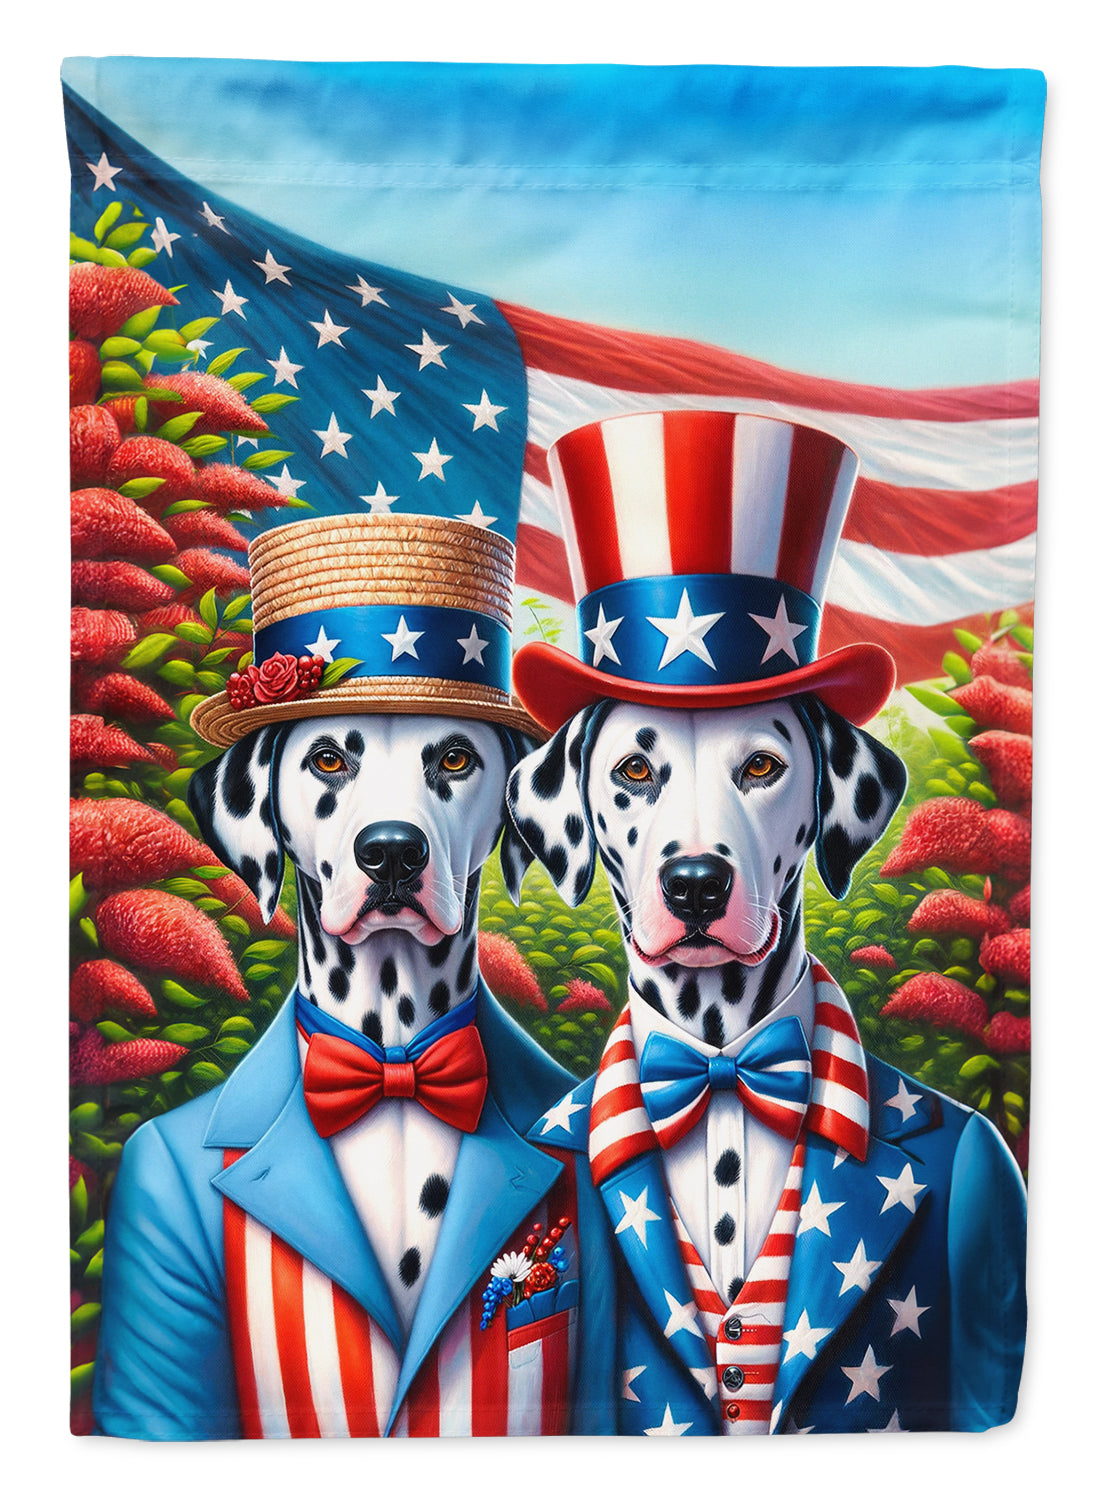 Buy this All American Dalmatian House Flag